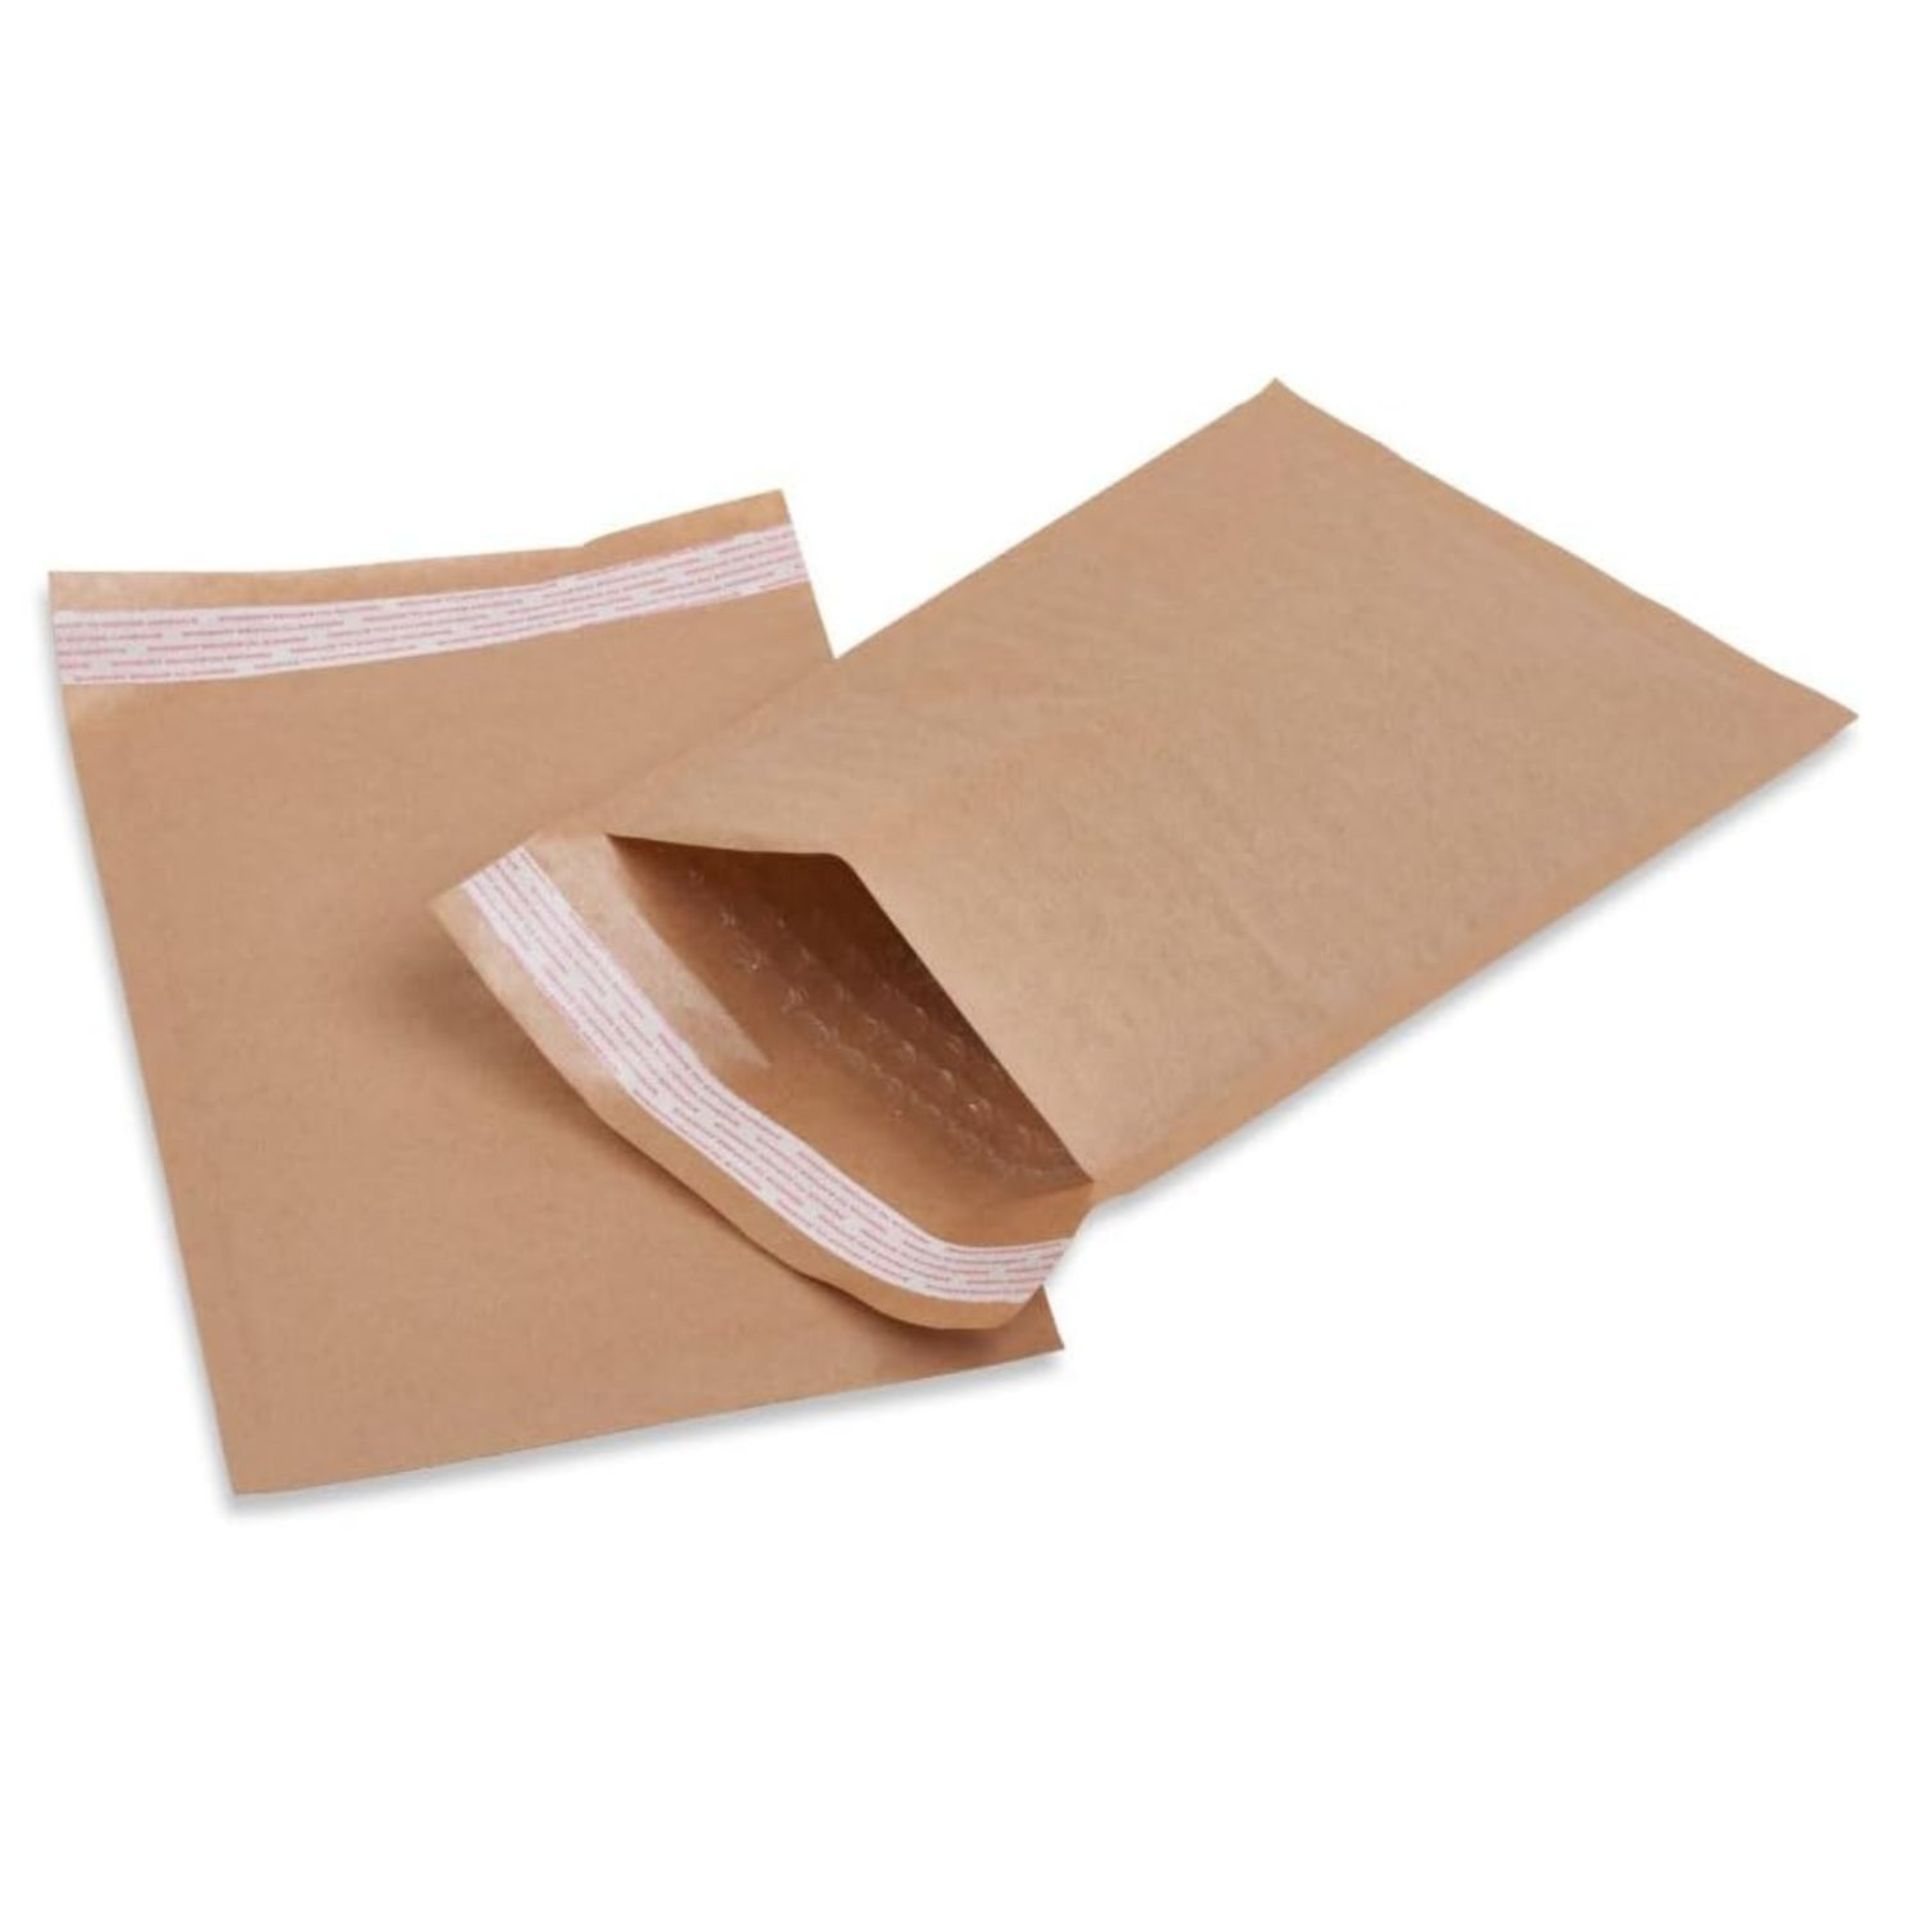 1000 BUBBLE ENVELOPES WITH PEEL AND SEAL TOUGH LIGHT PADDED (140 X 210MM) - Image 3 of 4